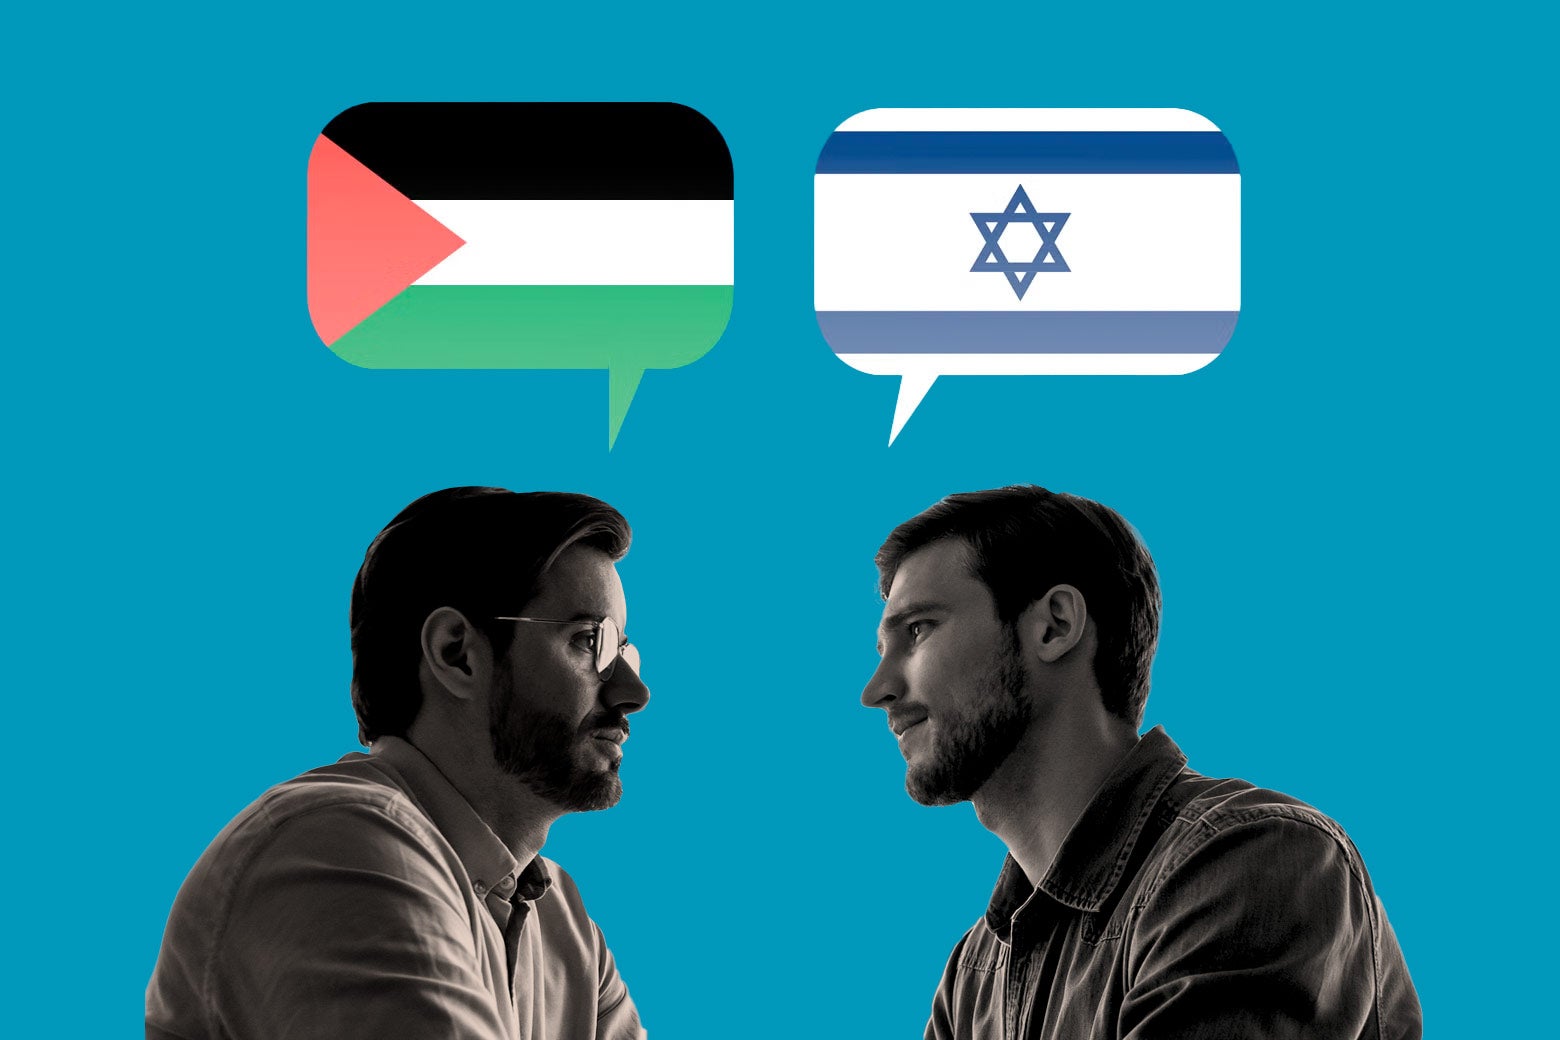 Two people, facing each other and speaking, with one speech bubble holding the Palestinian flag and the other holding the Israeli flag. 